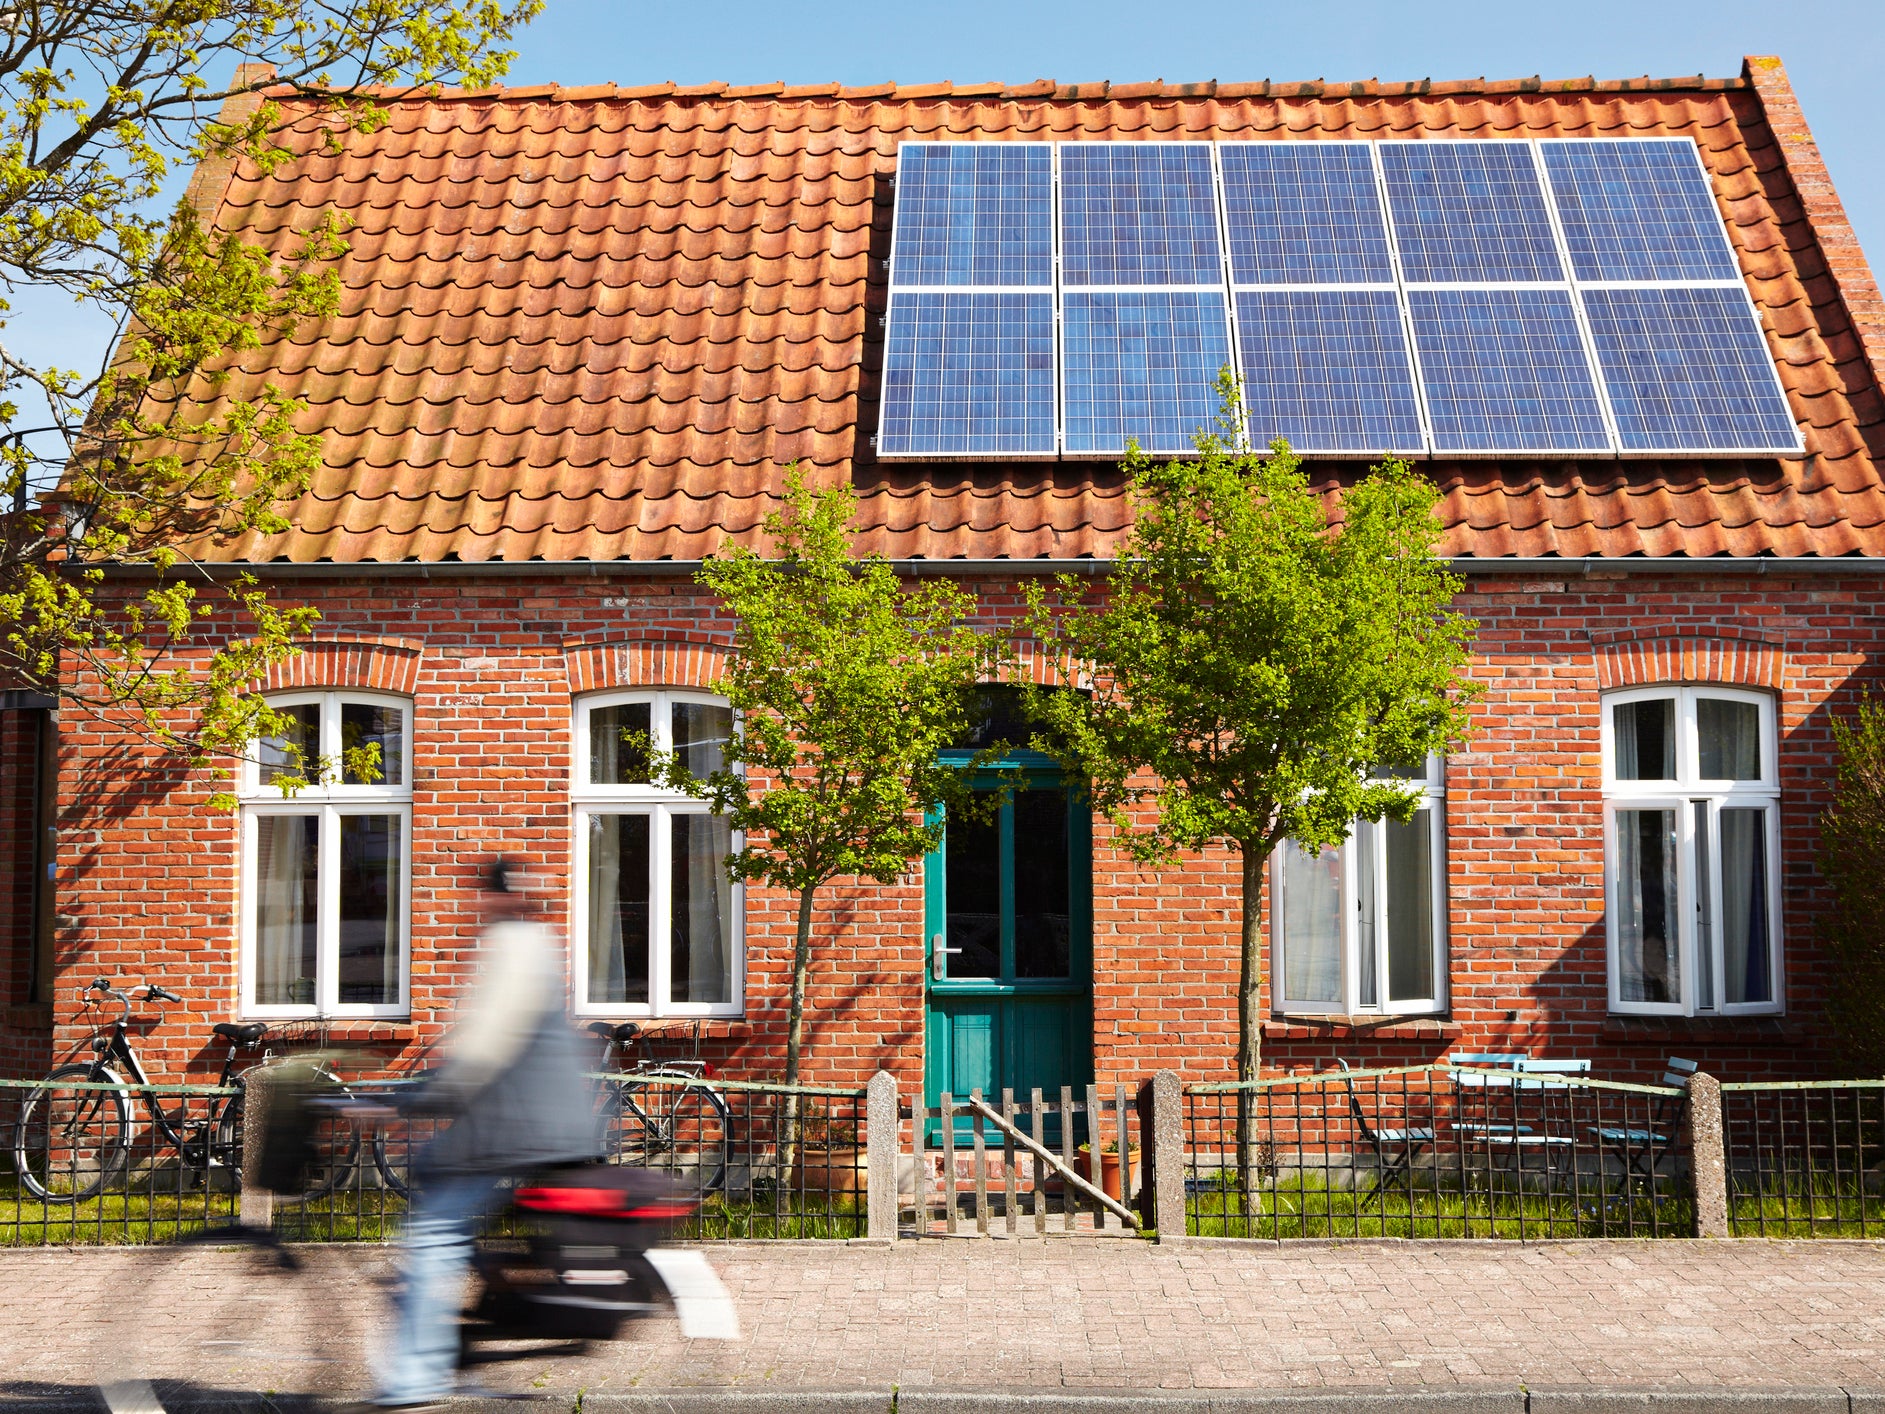 Retrofitting old buildings and designing more efficient housing stock are among the key recommendations, while facilitating active transport is also regarded as vital to ensuring a low-carbon economy in the future